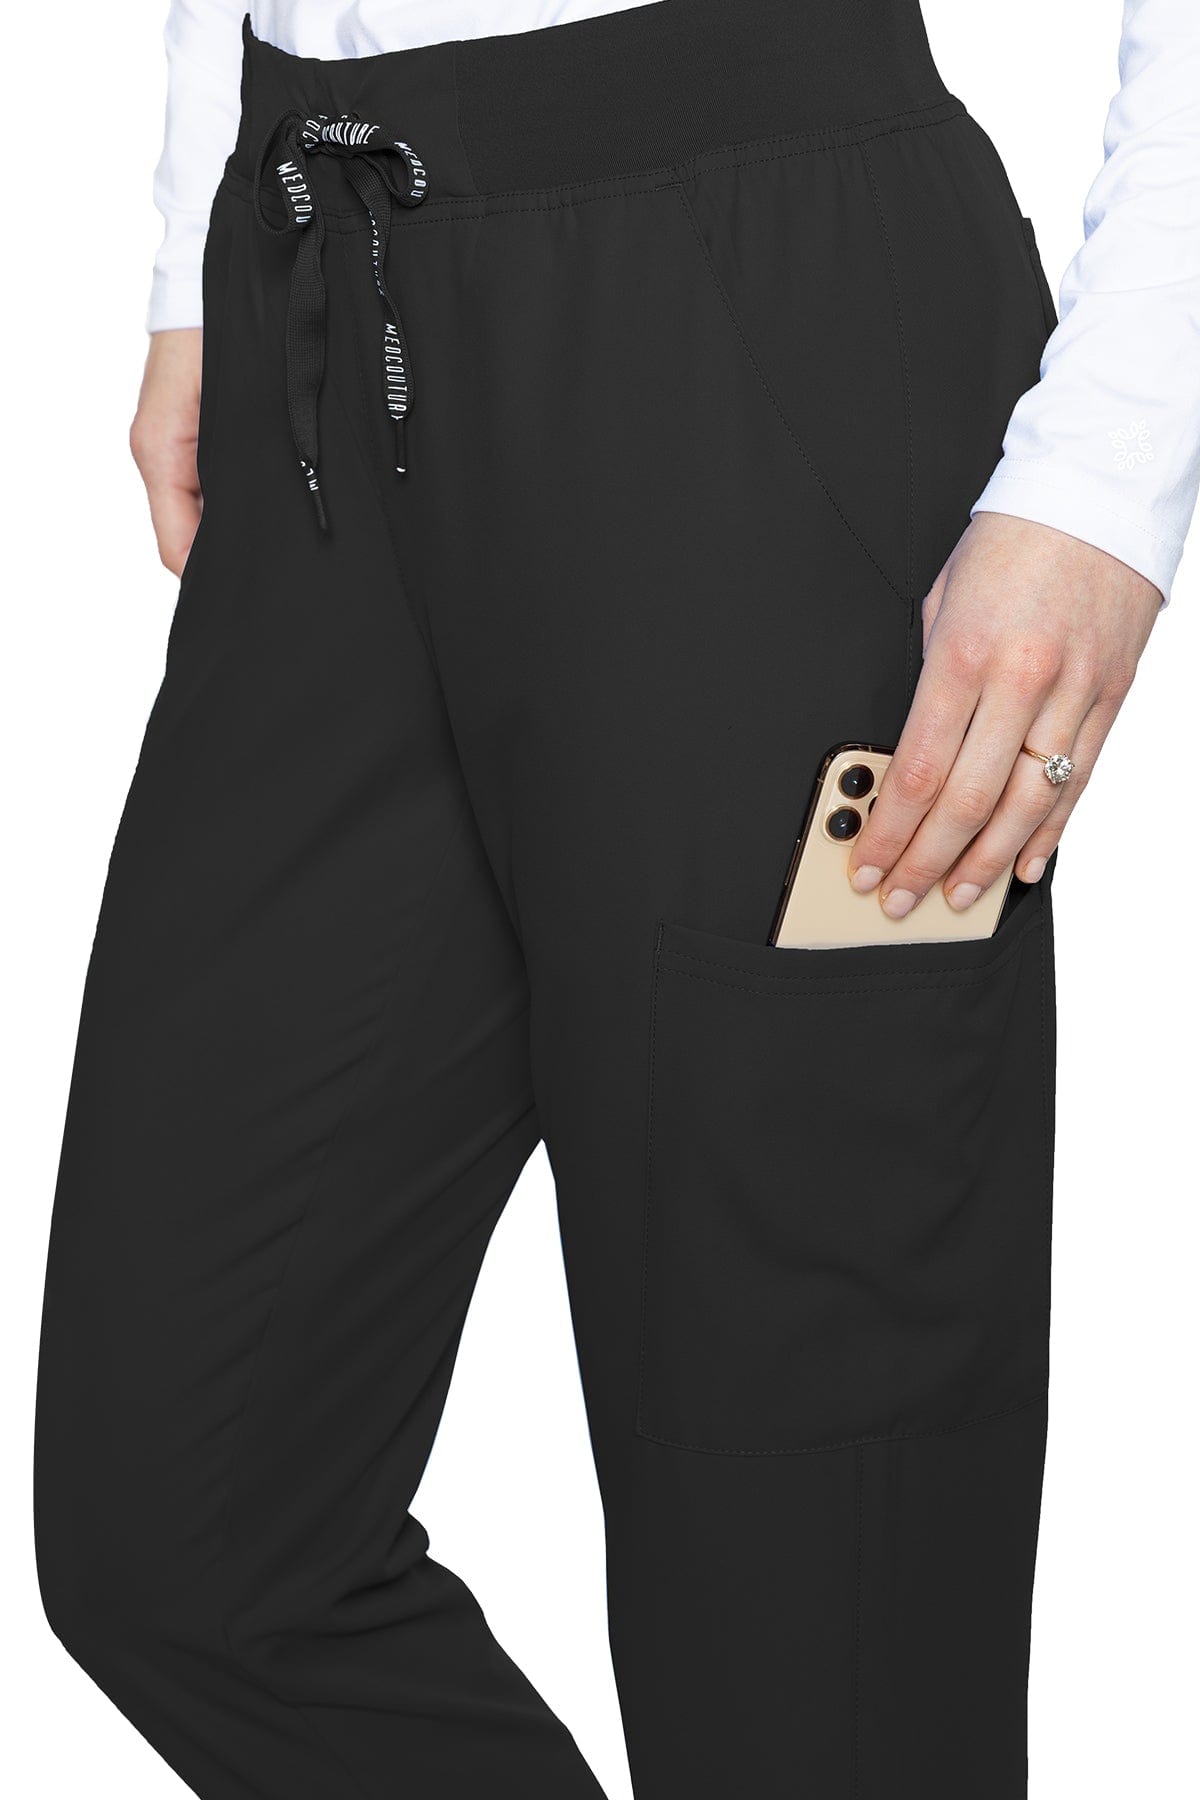 MedCouture Insight 2711 scrub pant in black from Coulee Scrubs.  Front view side pocket. 